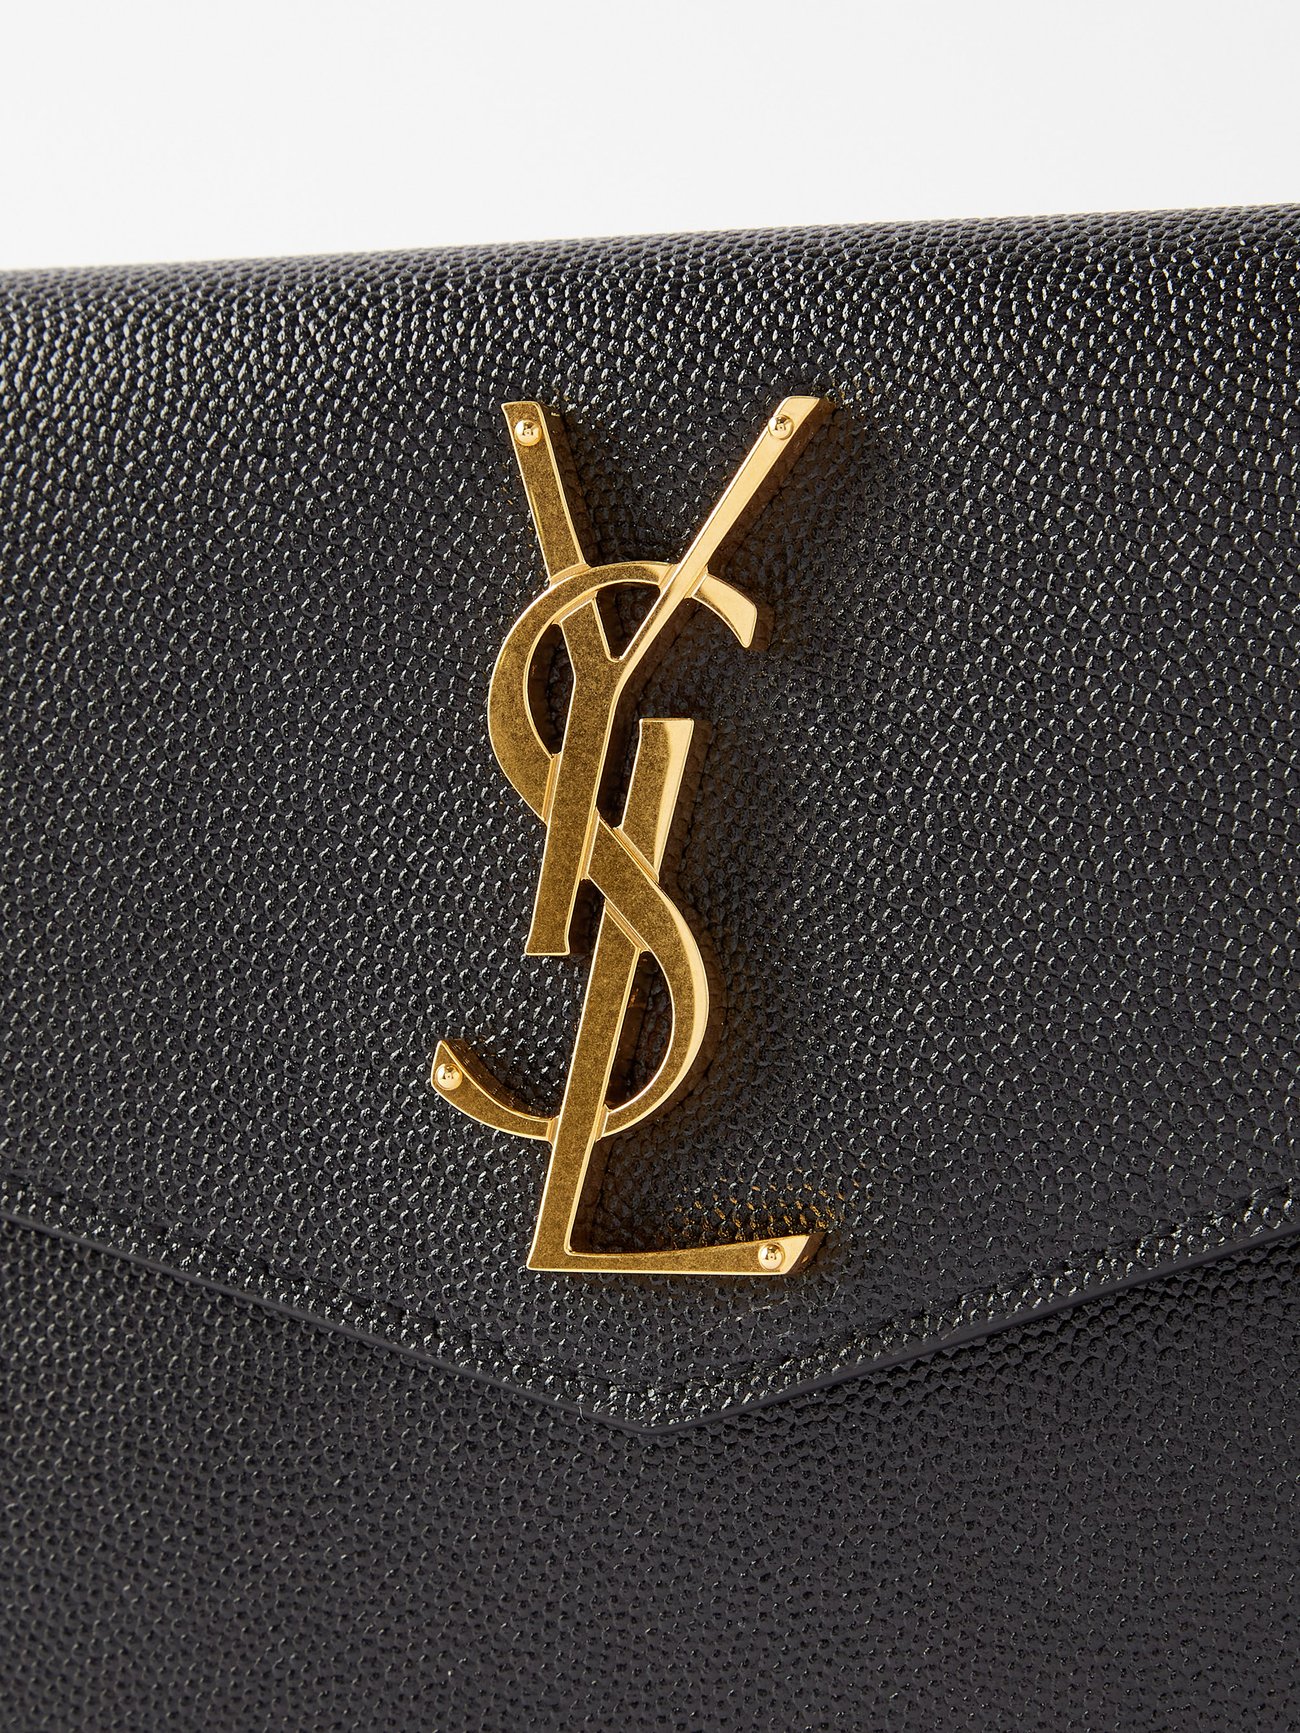 YSL UPTOWN POUCH IN BLACK WITH GOLD METAL FINISH